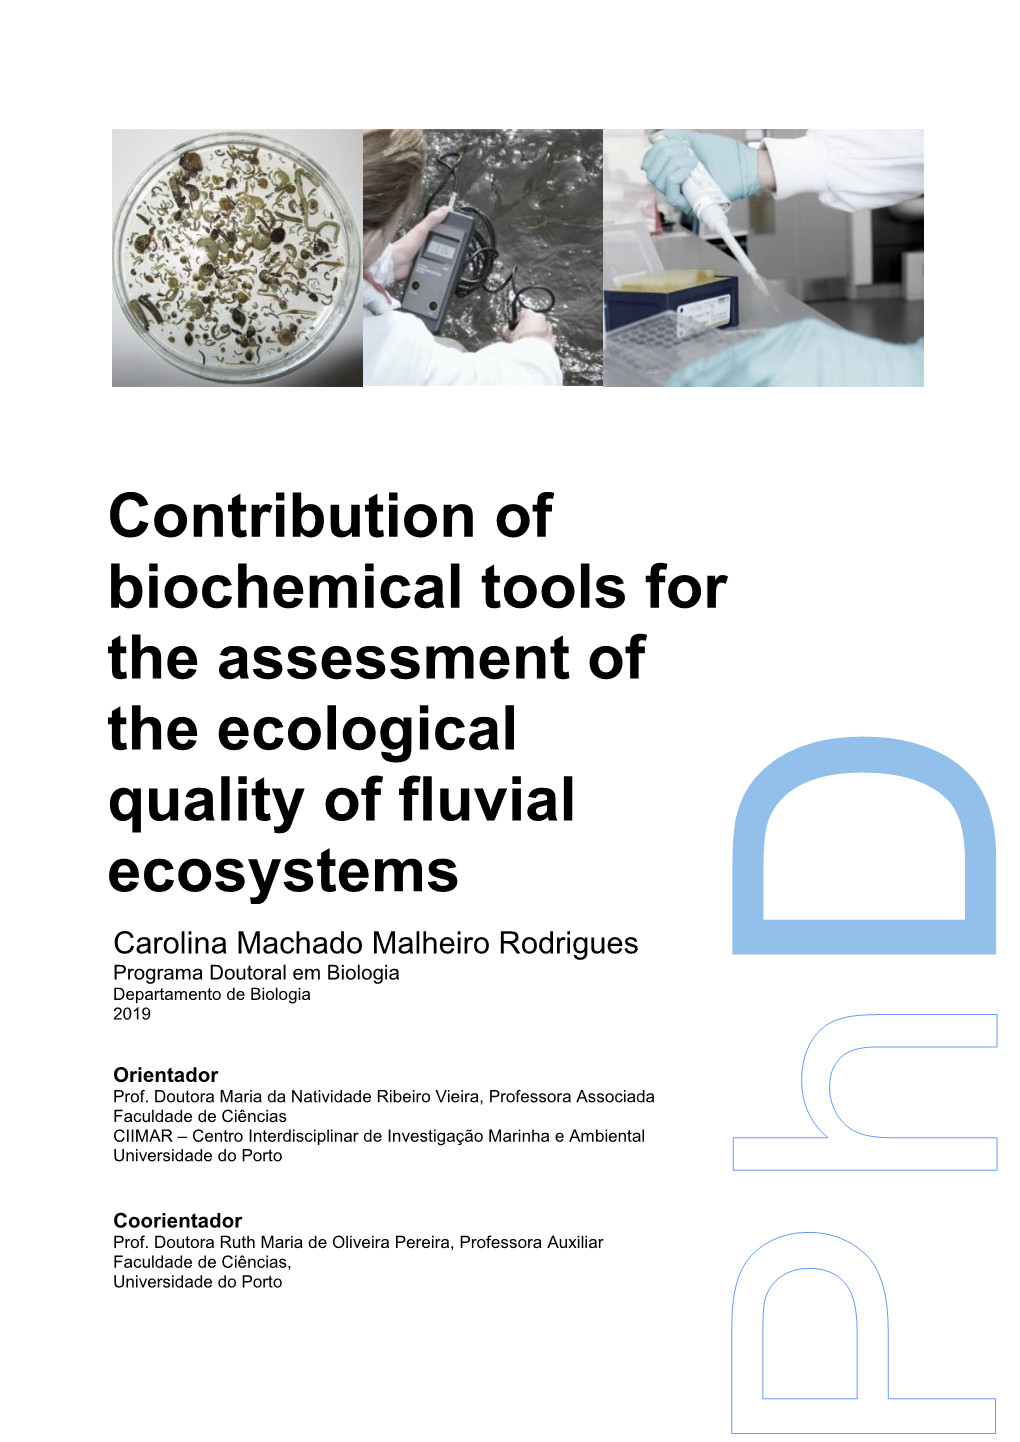 Contribution of Biochemical Tools for the Assessment of the Ecological Quality of Fluvial Ecosystems